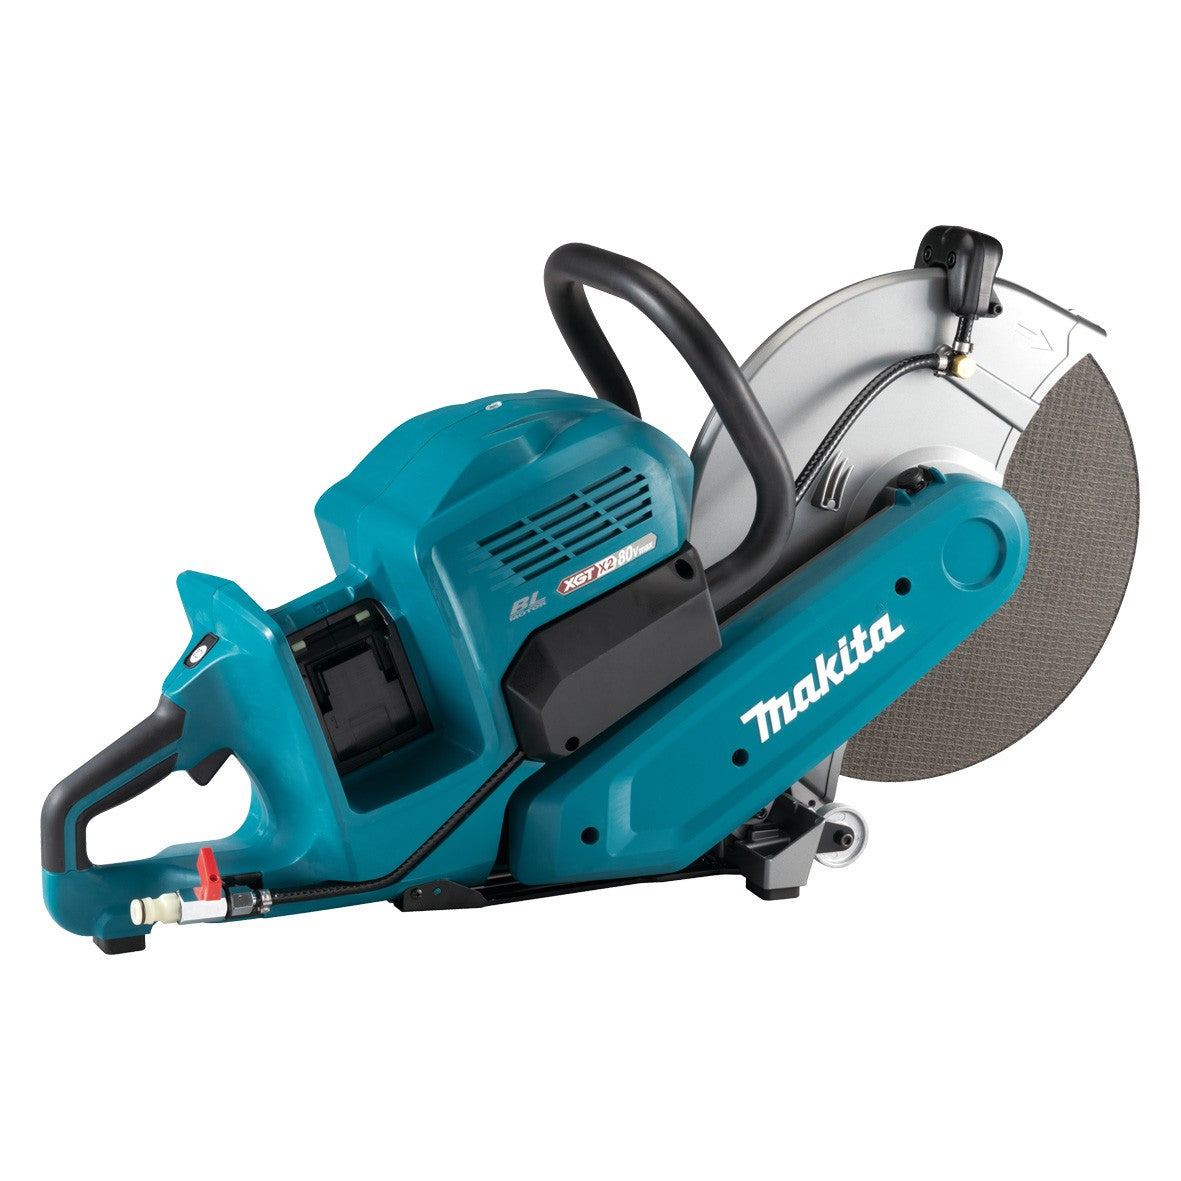 80V Max (40Vx2) Brushless 355mm (14") Power Cut Bare (Tool Only) CE001GZ by Makita